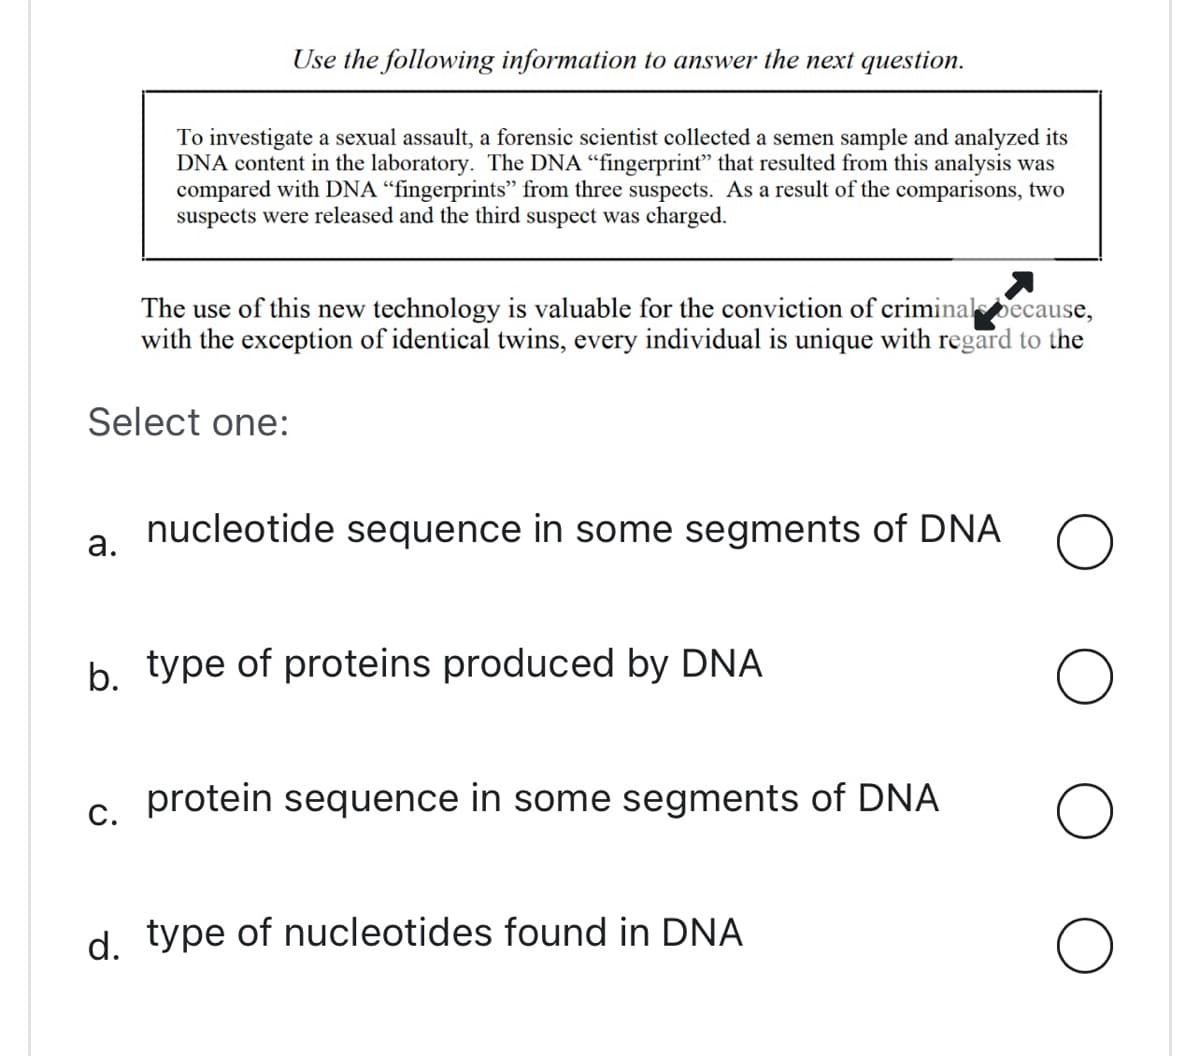 Use the following information to answer the next question.
To investigate a sexual assault, a forensic scientist collected a semen sample and analyzed its
DNA content in the laboratory. The DNA "fingerprint" that resulted from this analysis was
compared with DNA "fingerprints" from three suspects. As a result of the comparisons, two
suspects were released and the third suspect was charged.
The use of this new technology is valuable for the conviction of criminal because,
with the exception of identical twins, every individual is unique with regard to the
Select one:
a. nucleotide sequence in some segments of DNA O
O
O
O
C.
b. type of proteins produced by DNA
protein sequence in some segments of DNA
d. type of nucleotides found in DNA